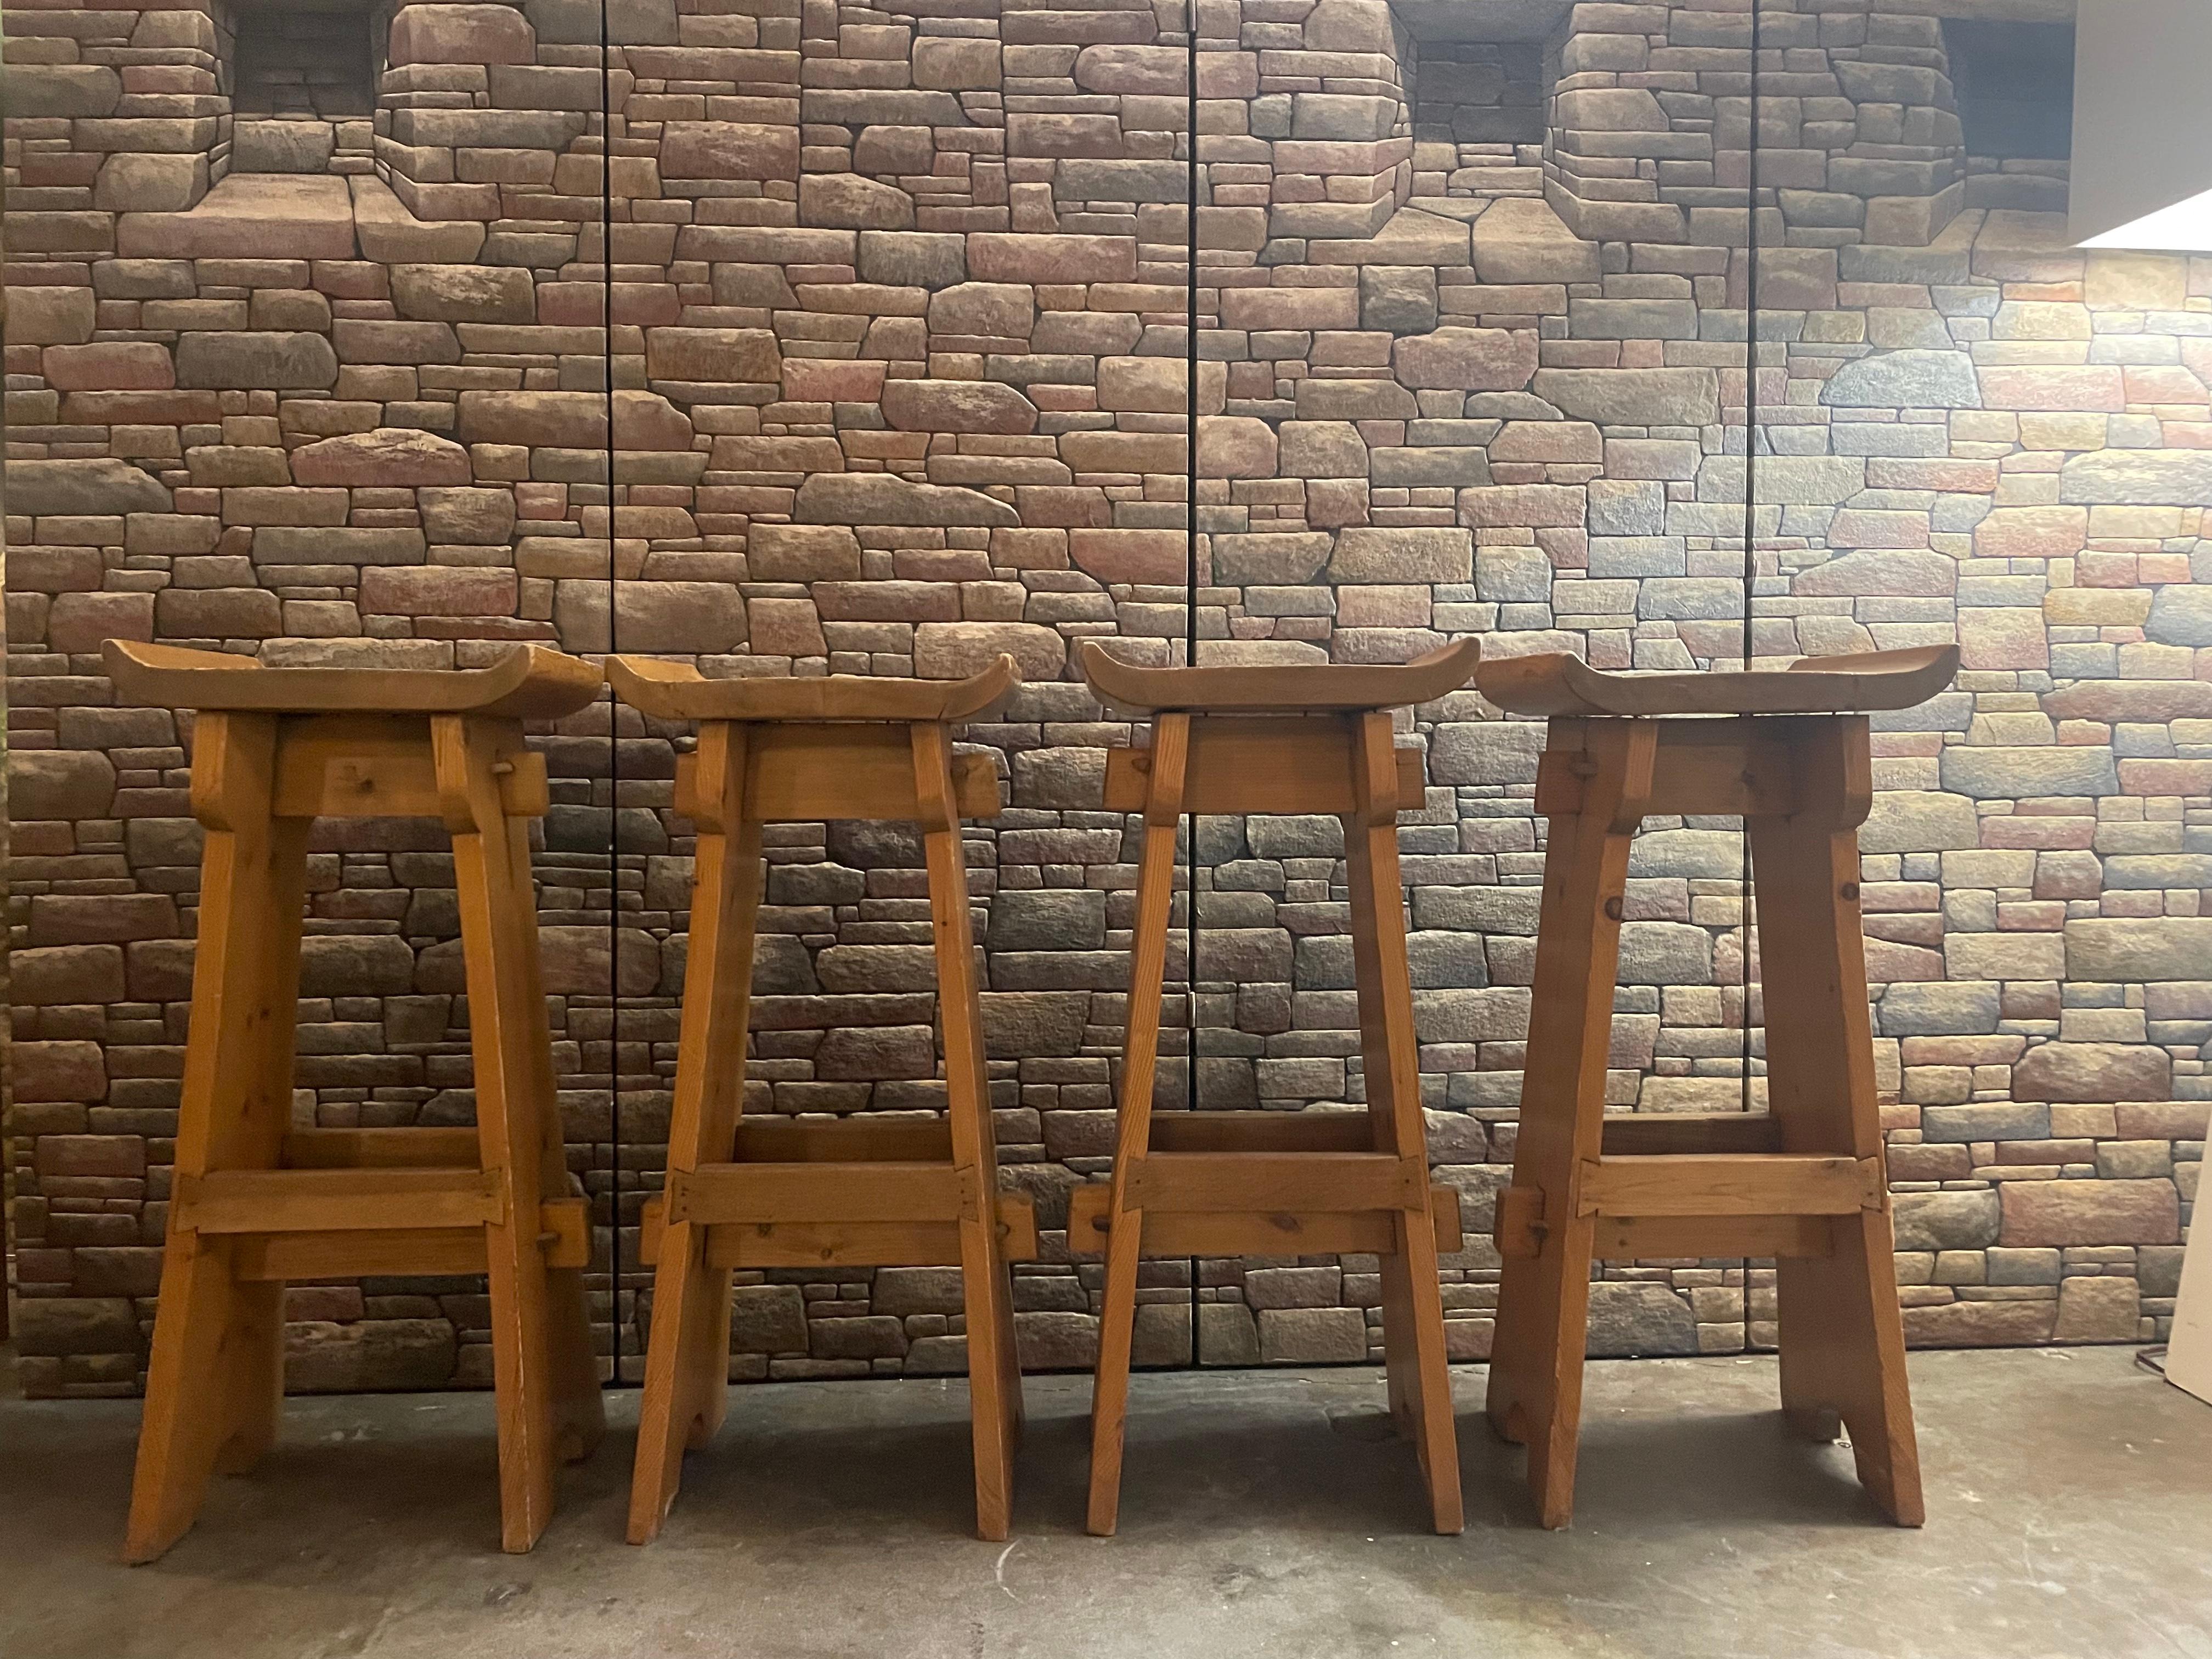 Set of 4 Danish pine brutalist bar stools, circa 1970s. Traces of age-appropriate wear and in good condition. 
Dimensions: 13.75